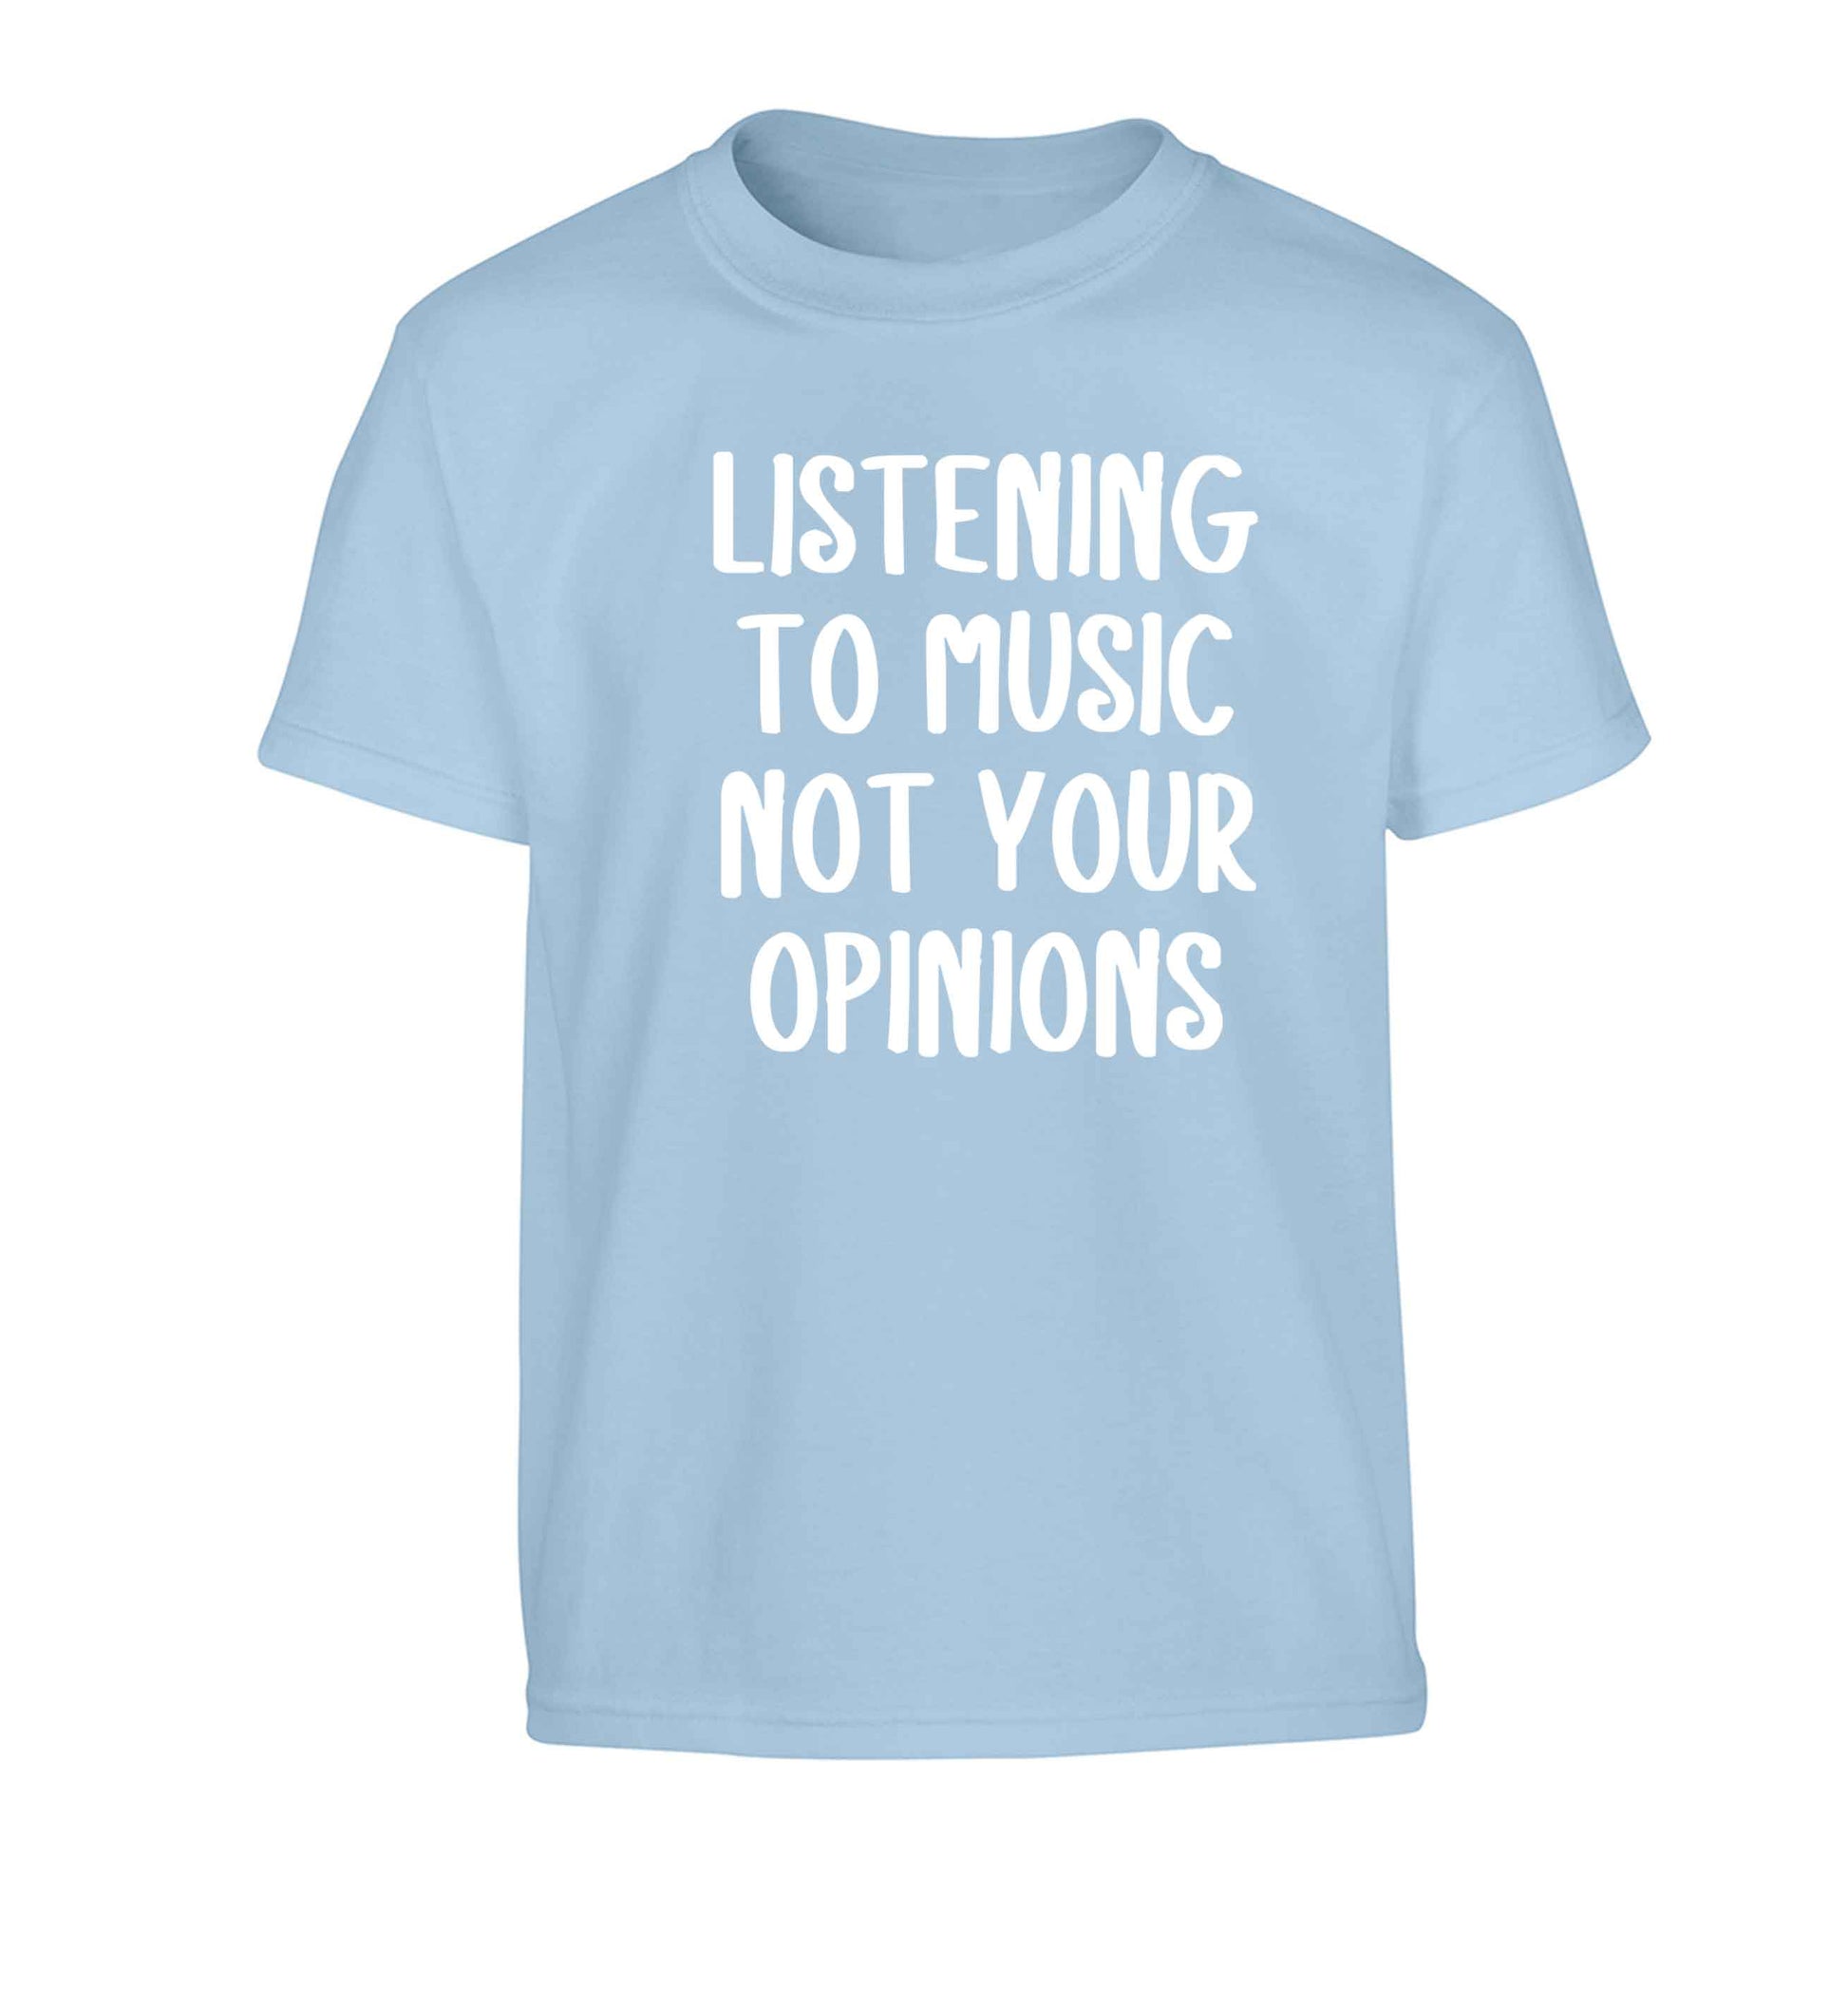 Listening to music not your opinions Children's light blue Tshirt 12-13 Years